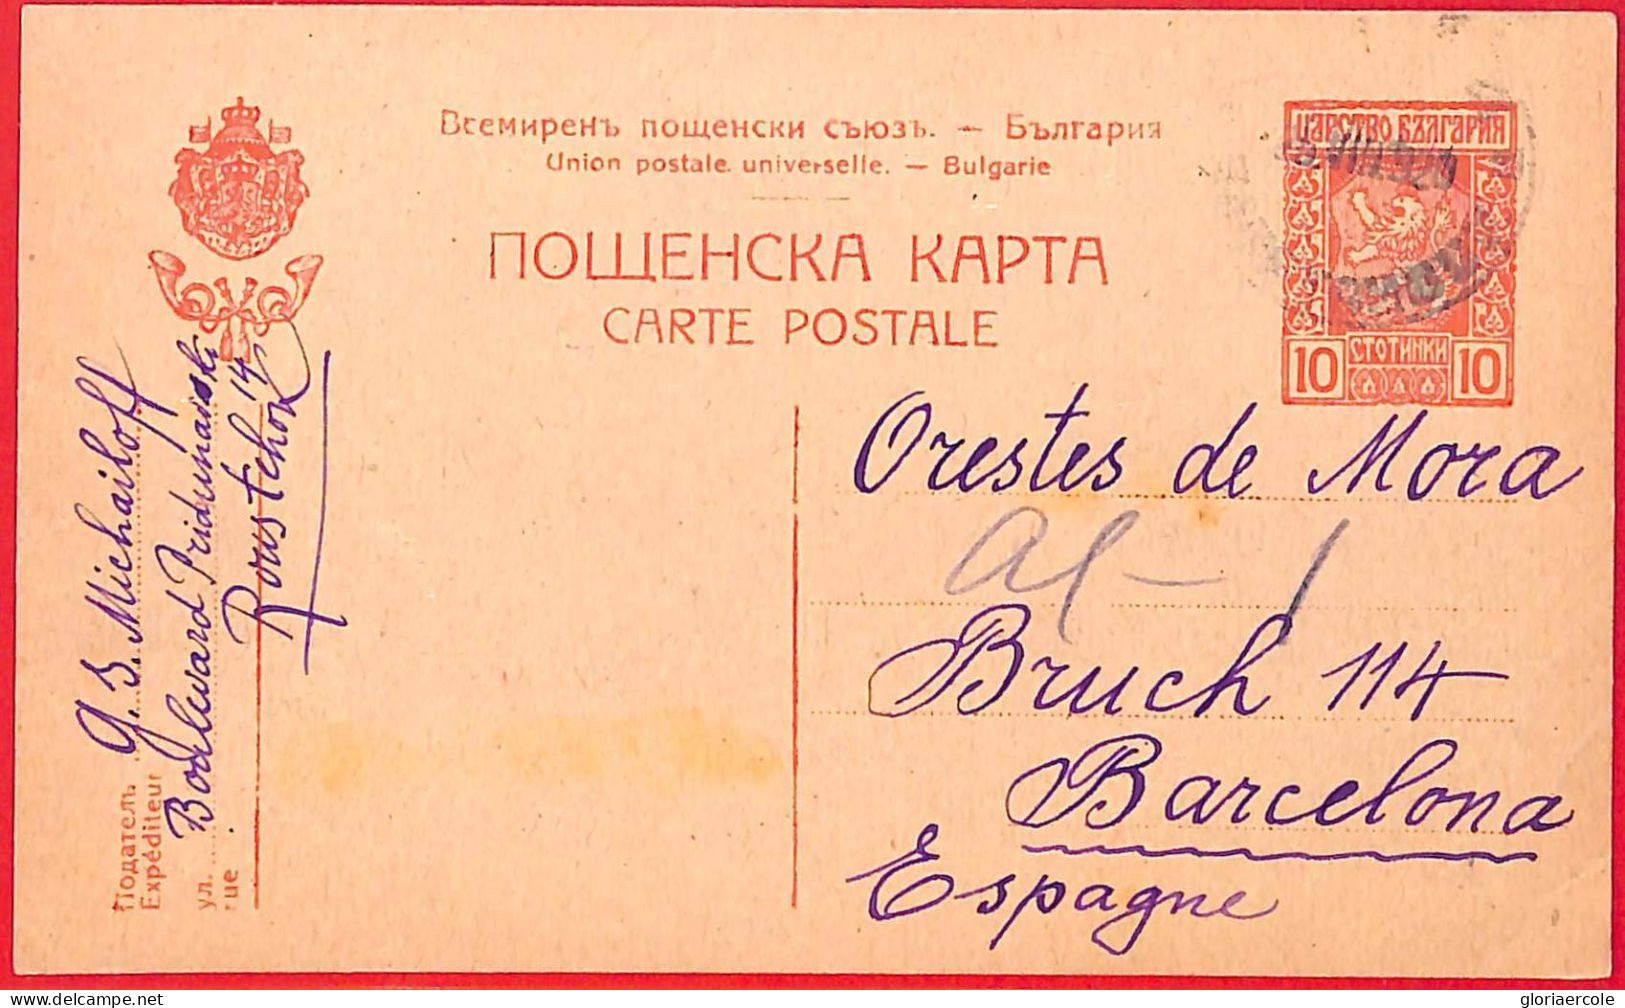 Aa0506 - BULGARIA - Postal History - STATIONERY CARD From ROUSTOUCK To SPAIN 1924 - Postales